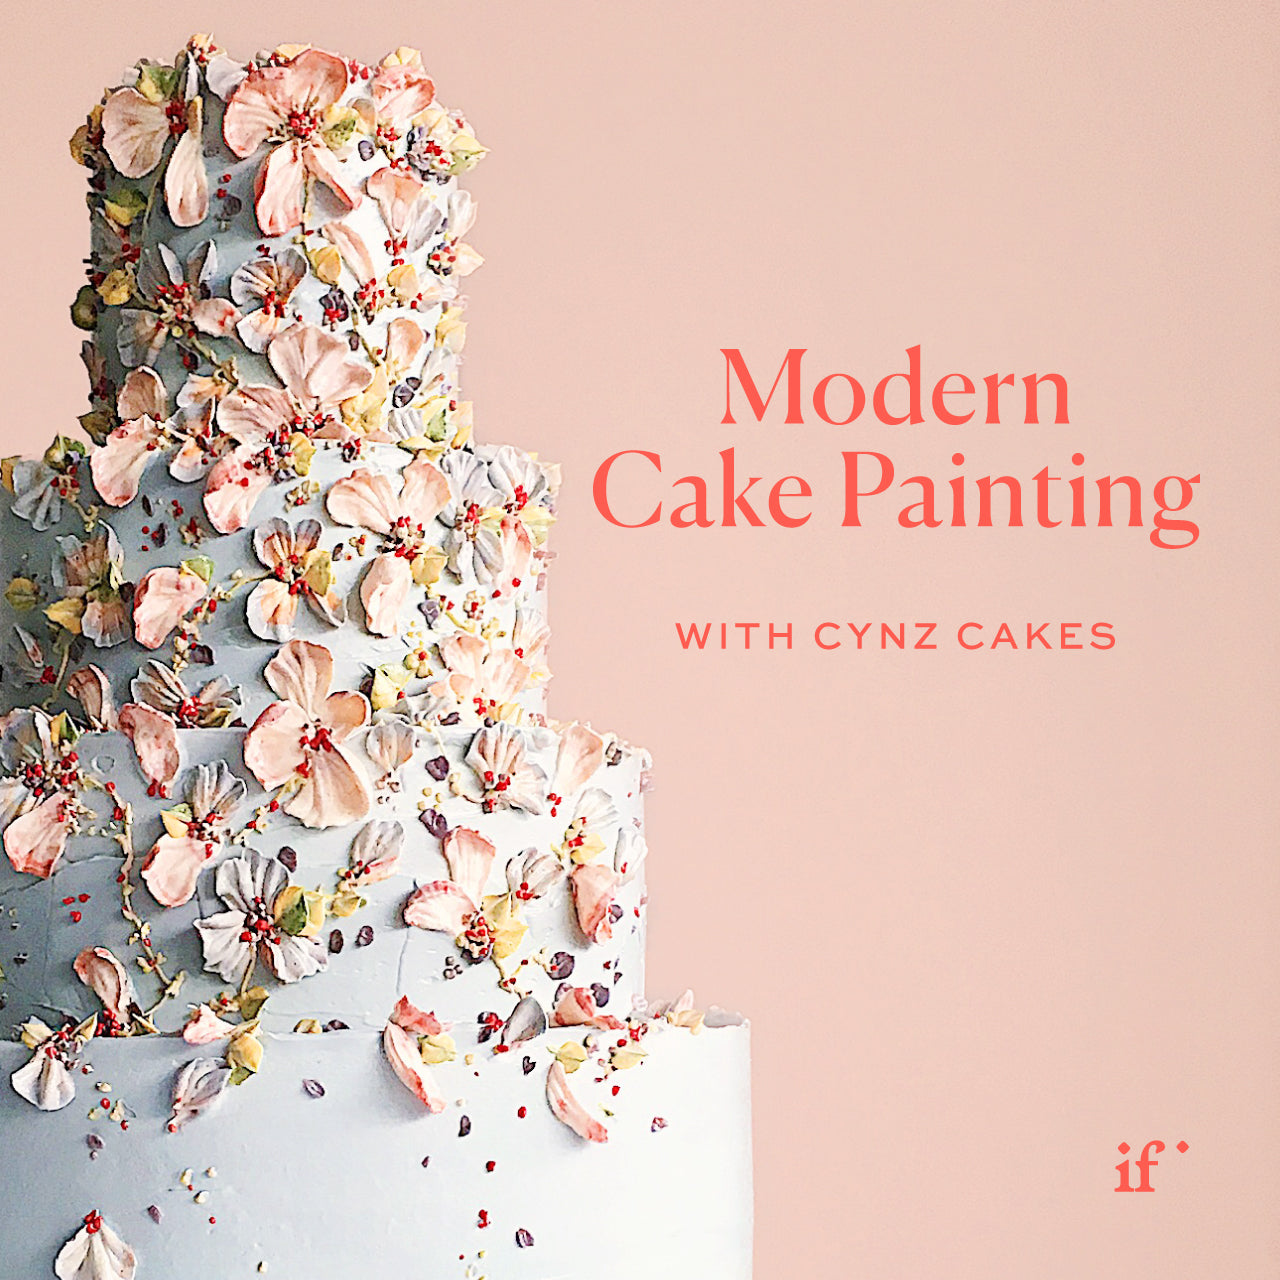 Modern Cake Painting with Cynz Cakes (EGPP21)  - 6 payments of $99